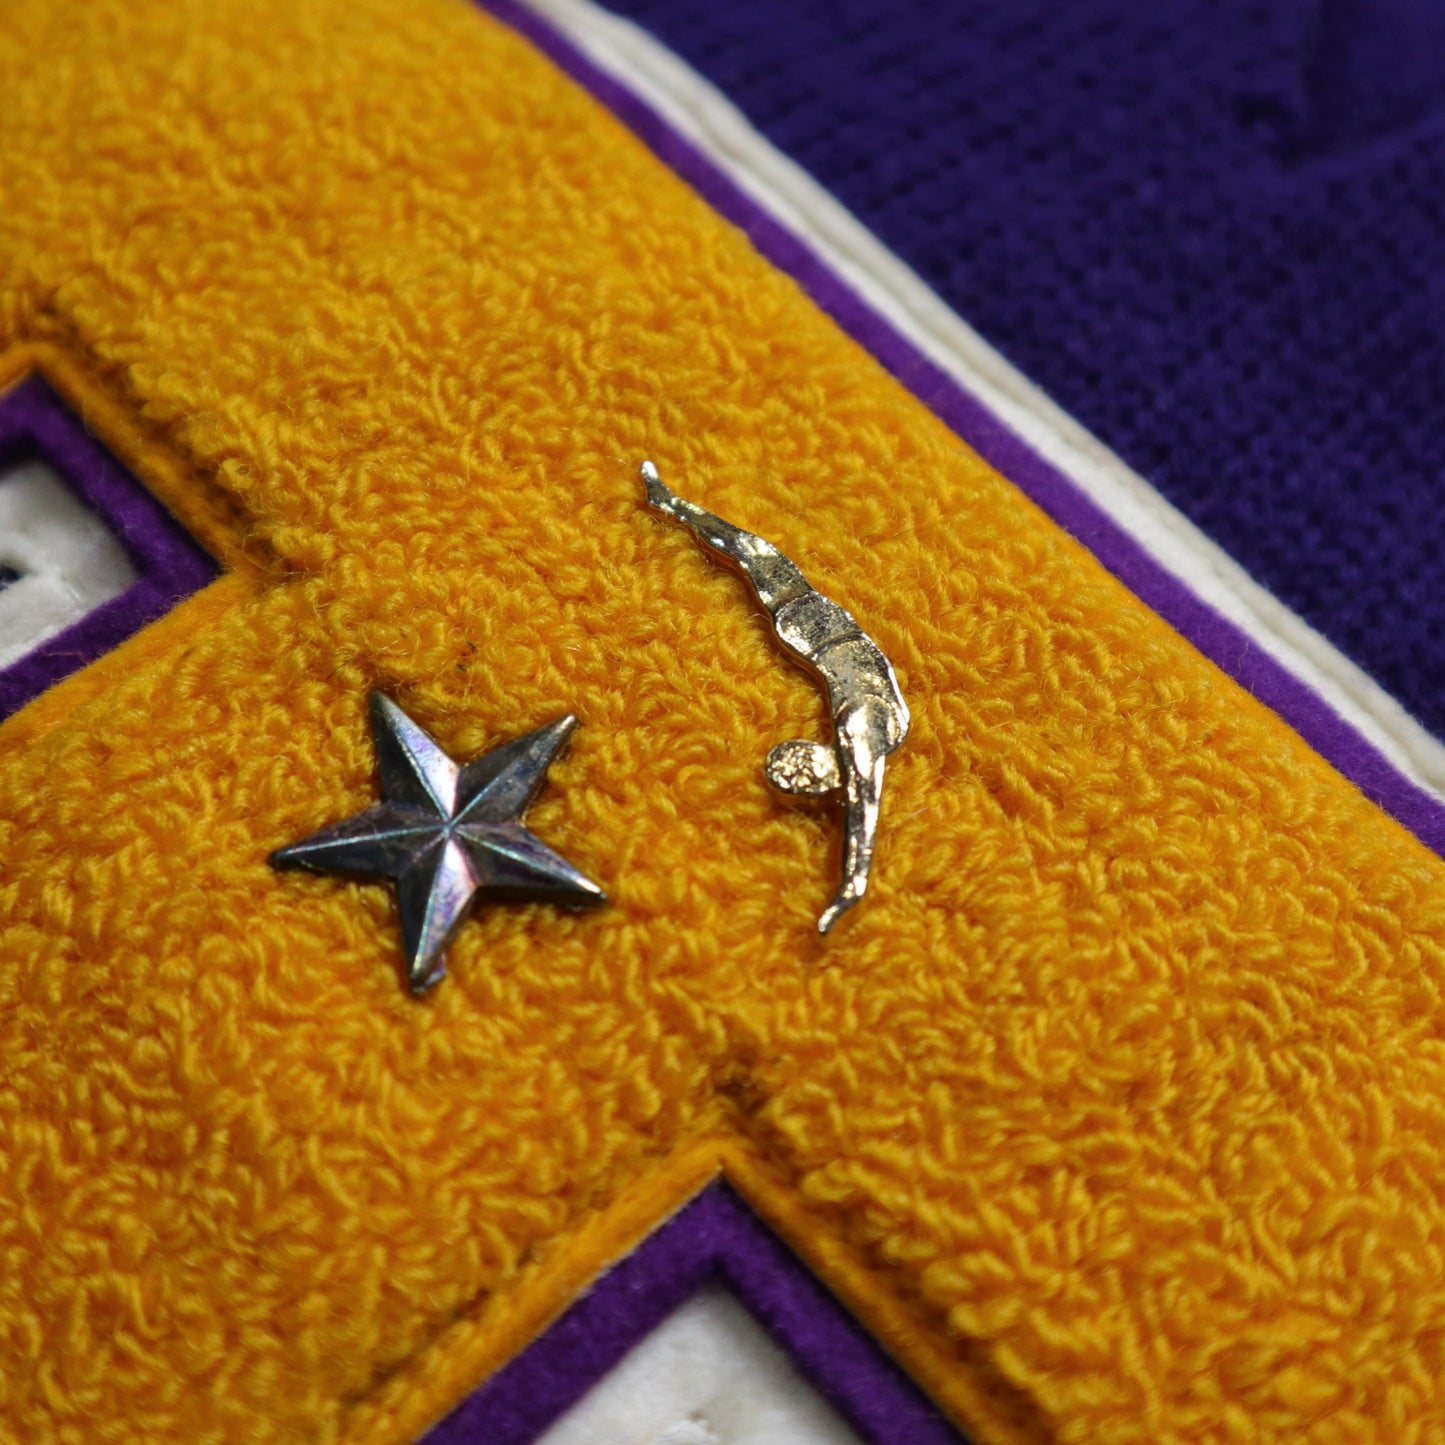 1970s Varsity Sweater patch “T” purple V-neck campus sweater